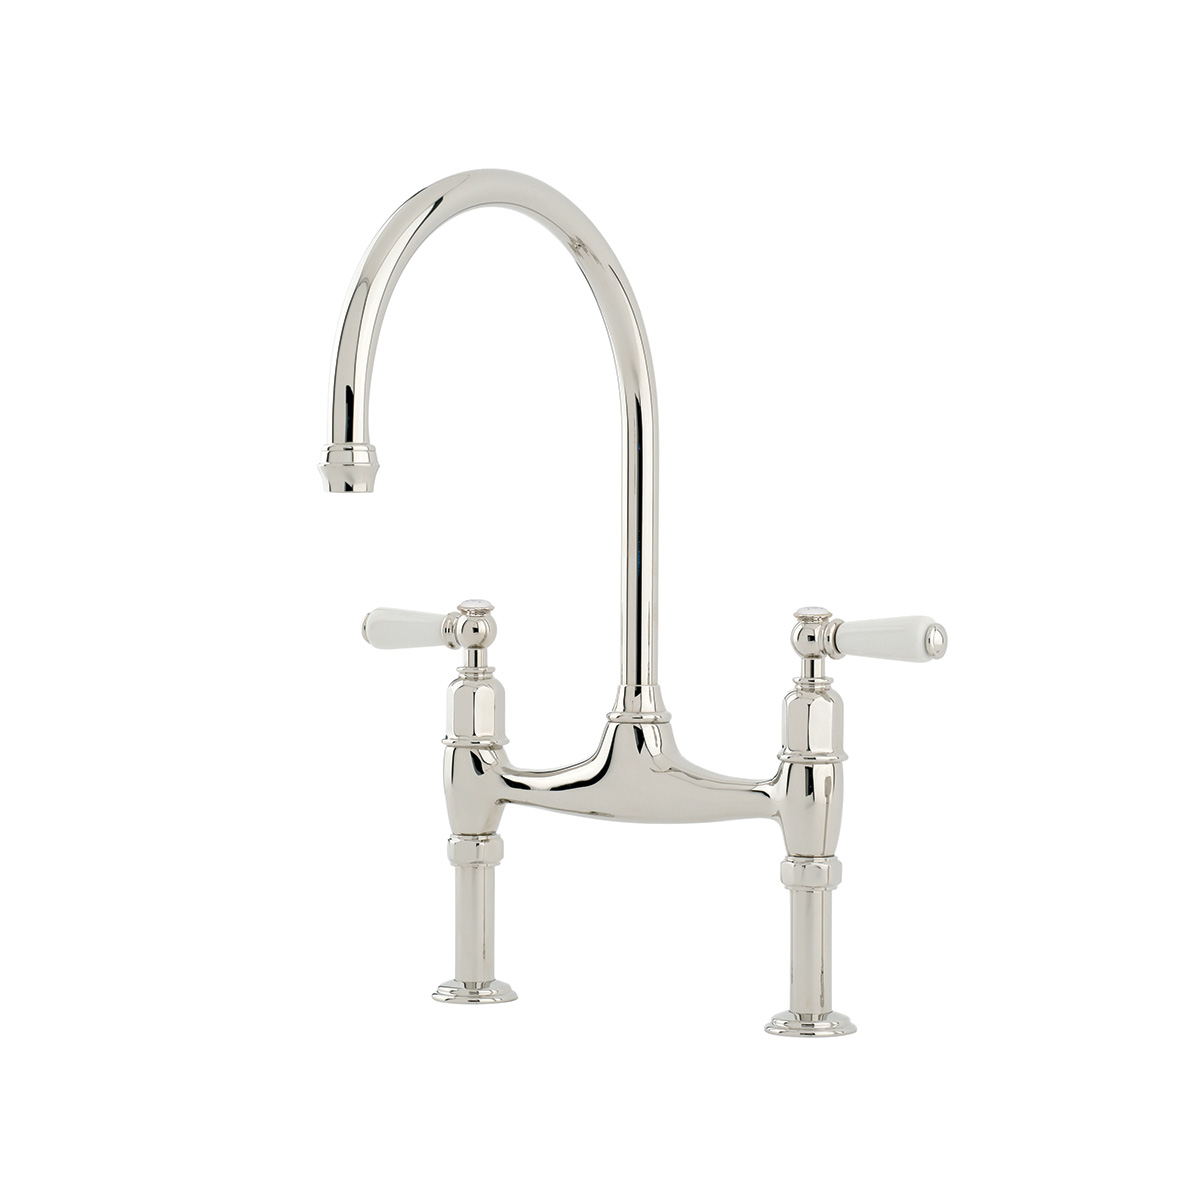 Shaws by Perrin & Rowe Pendleton bridge mixer in nickel. Ionian style kitchen tap with straight unions AUSH.4193. Distributed in Australia by Luxe by Design, Brisbane.